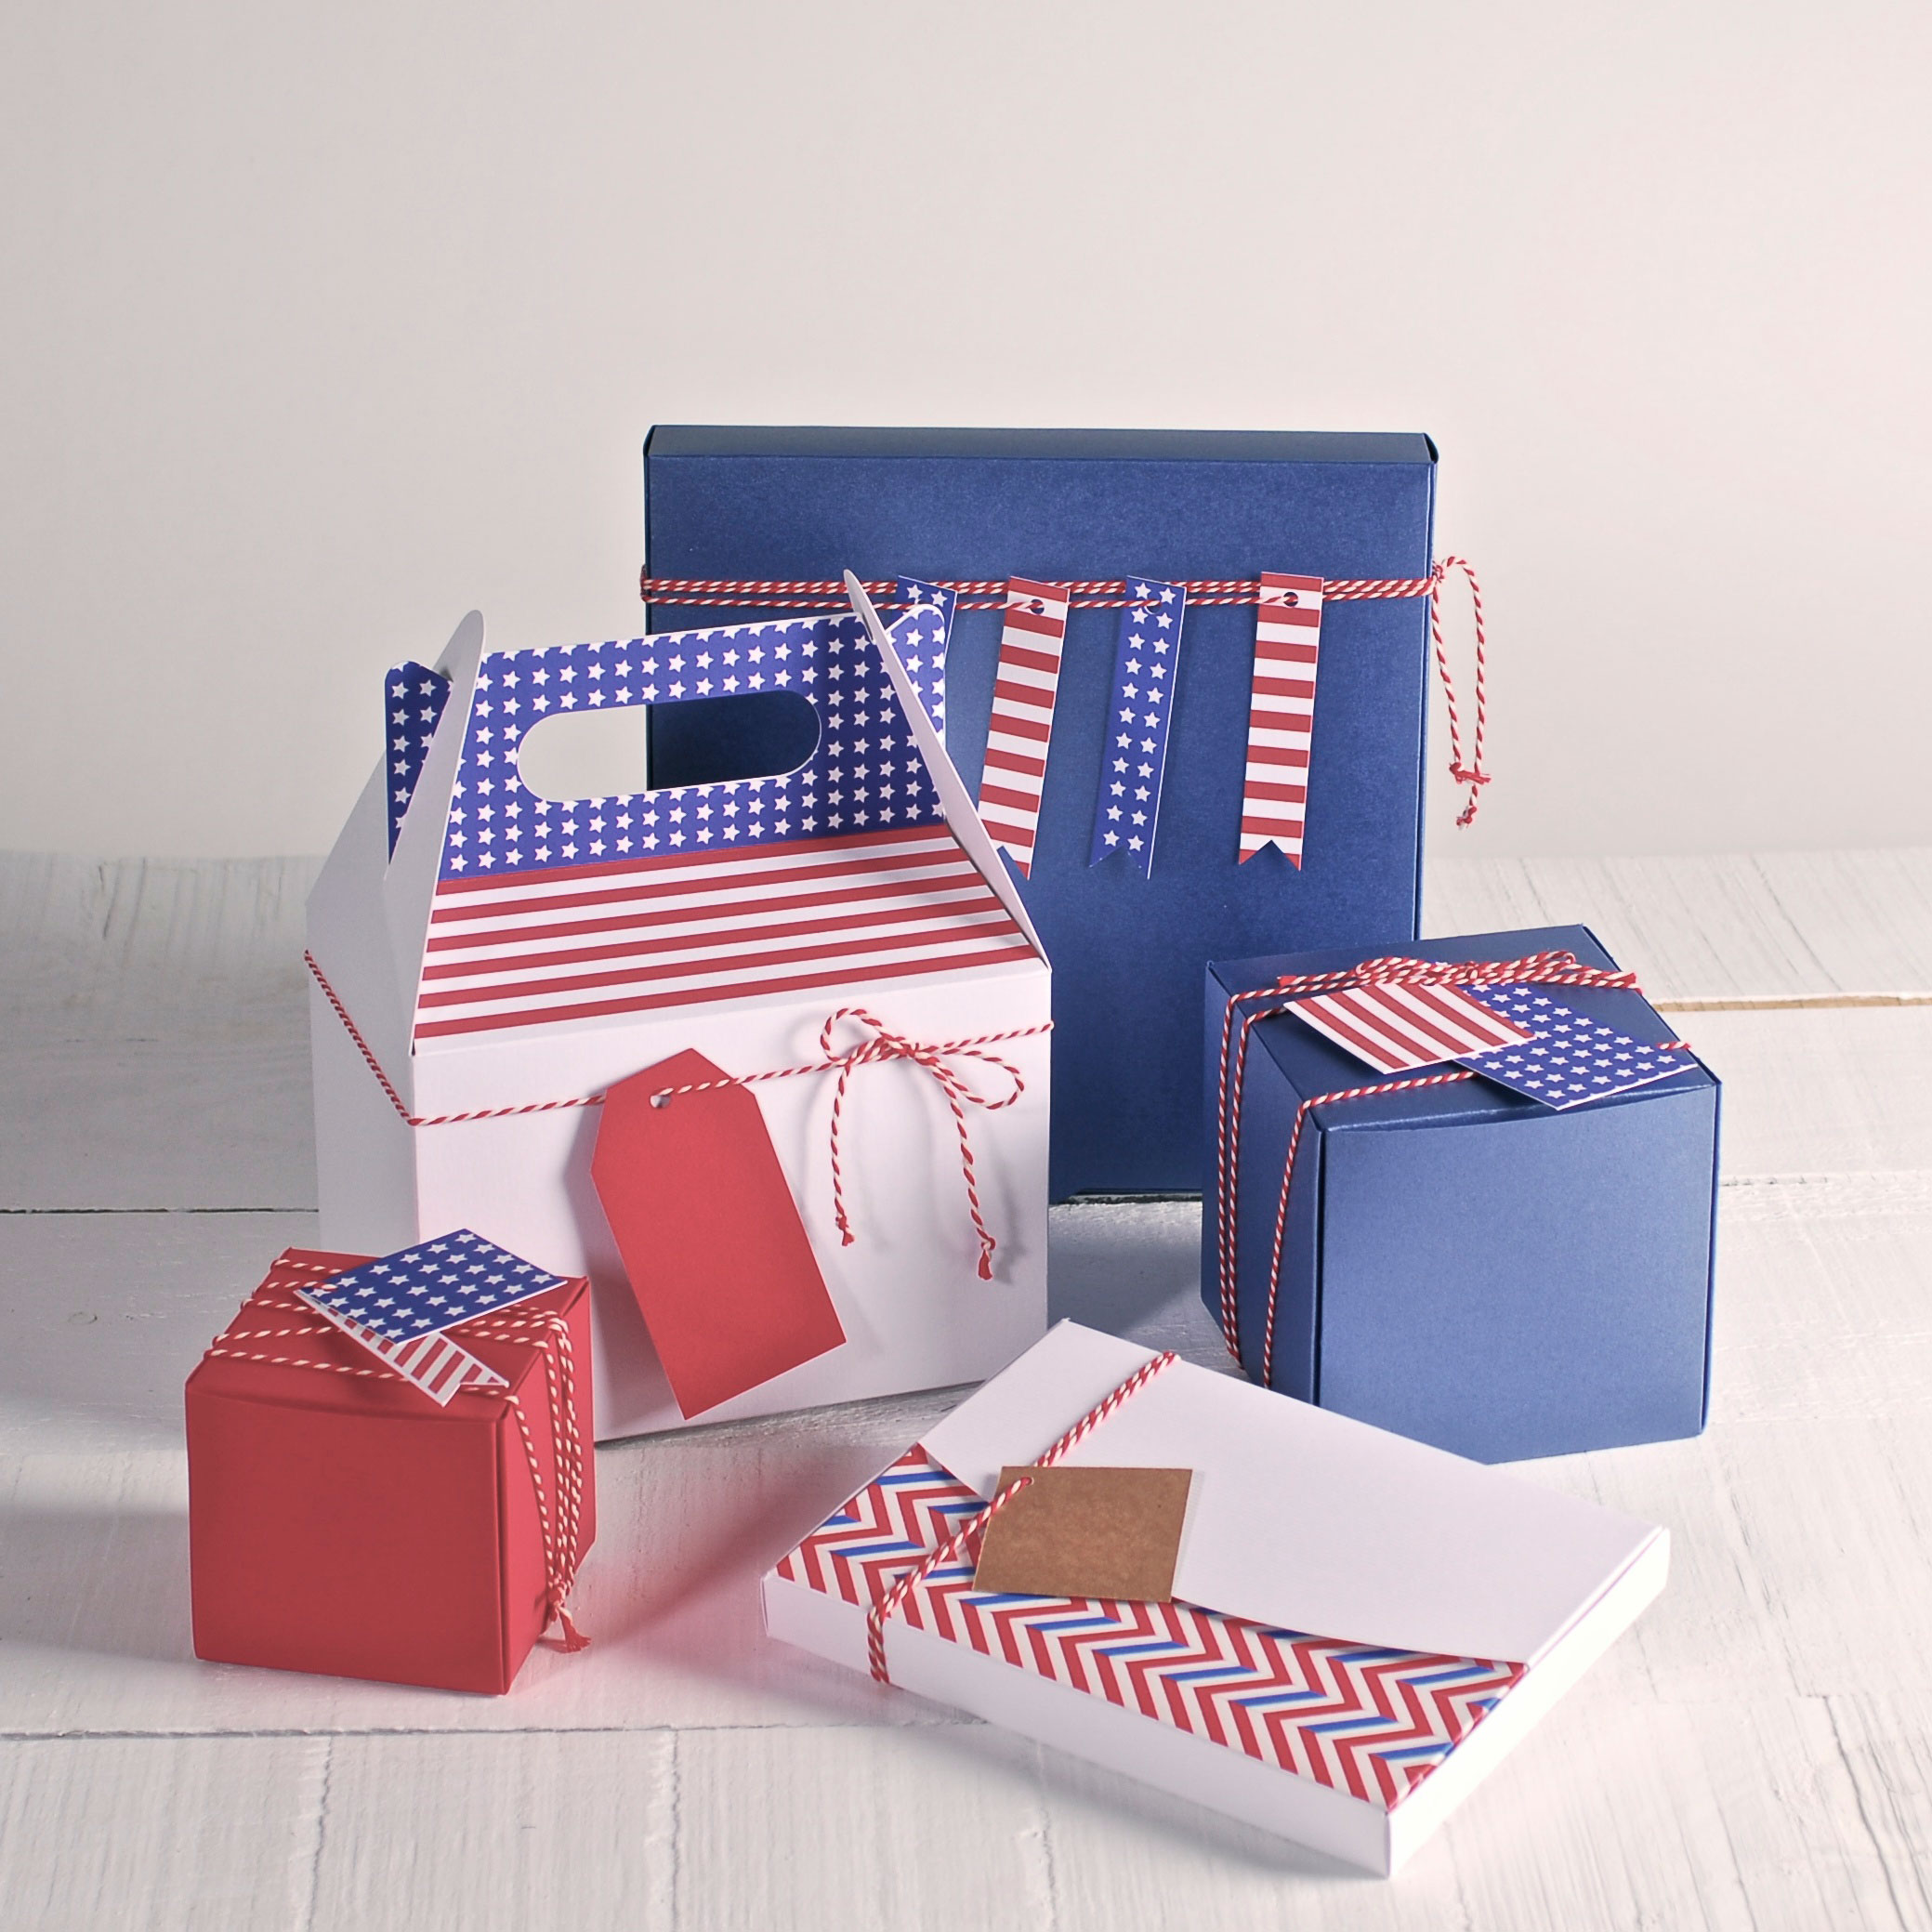 Gift boxes at www.selfpackaging.com